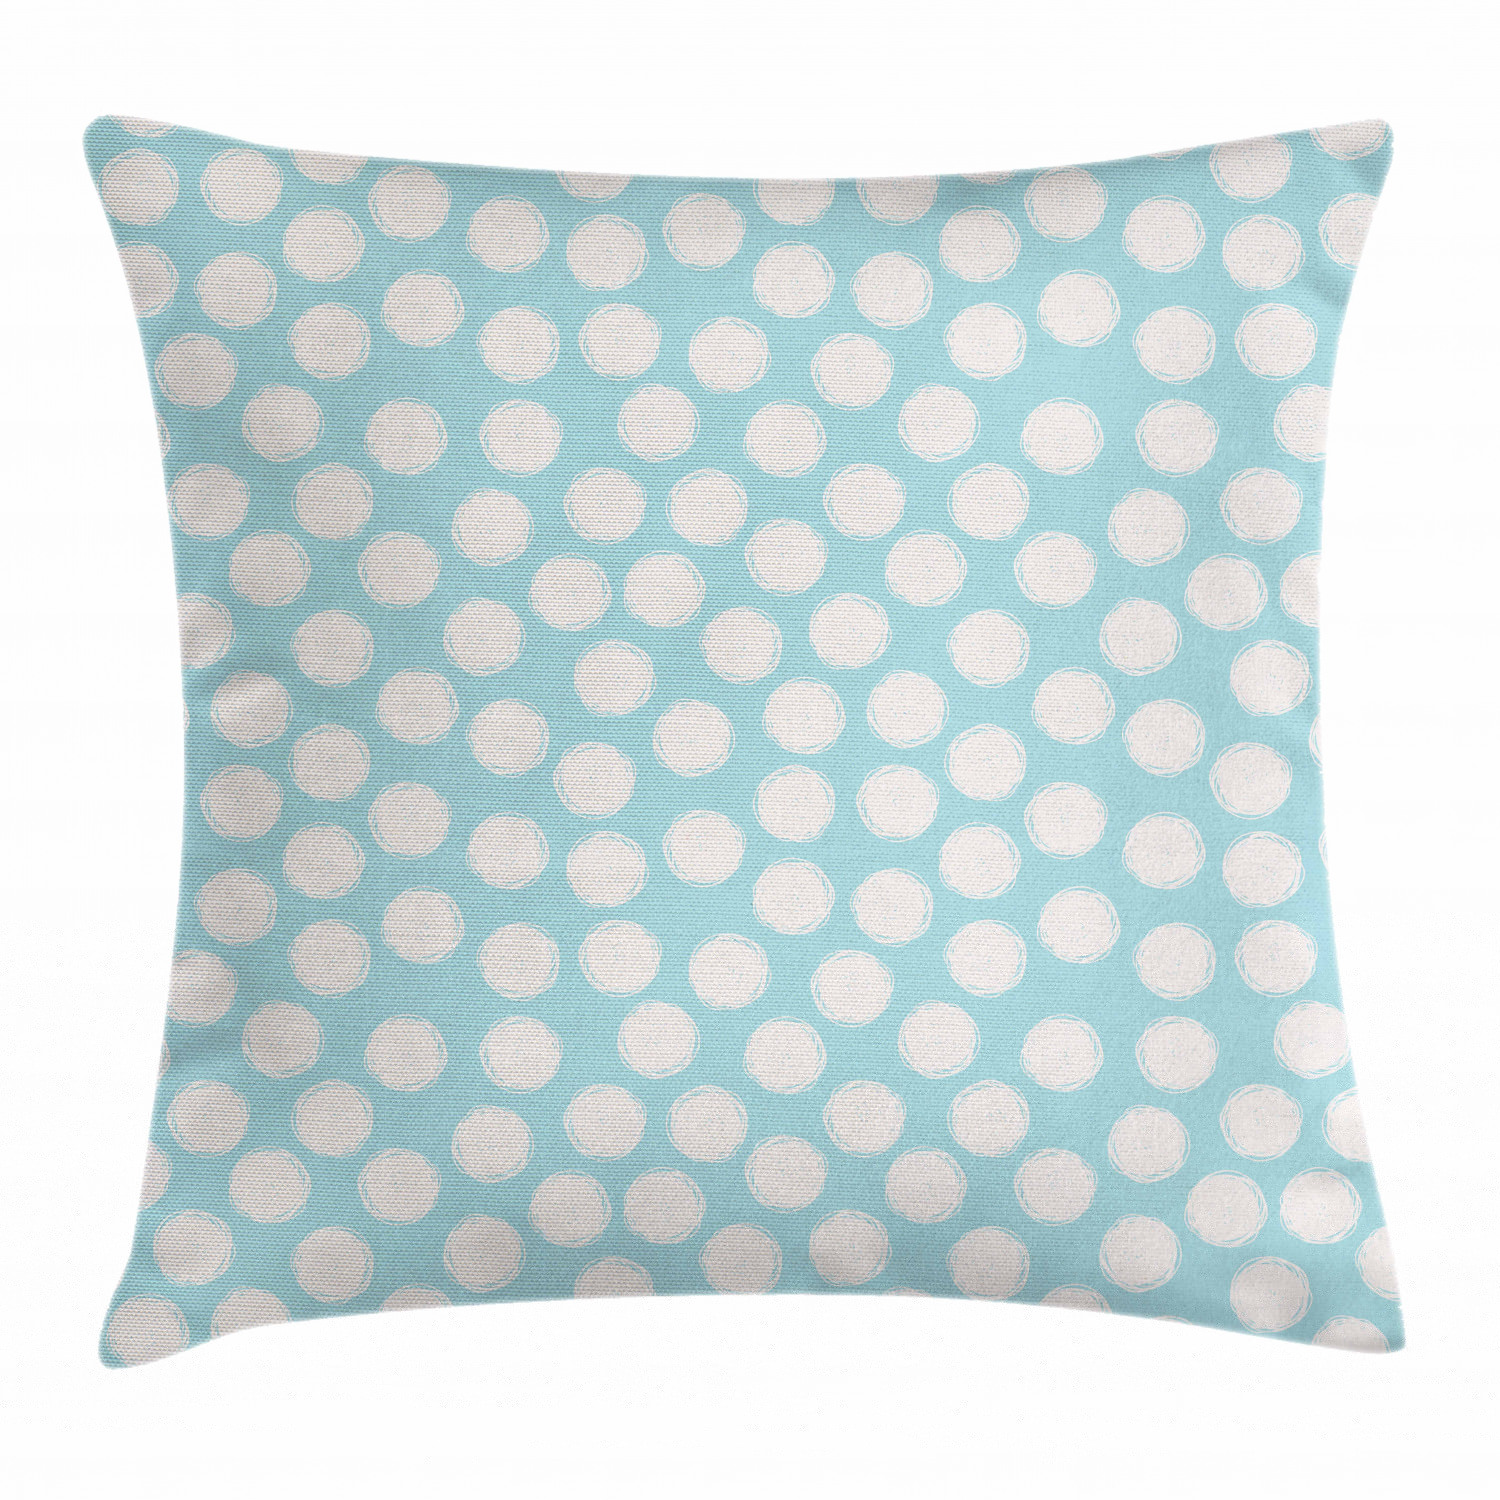 Kids Throw Pillow Cushion Cover, Doodle Style Spots on a Pale Blue Background Artistic Boys Kids Baby Pattern, Decorative Square Accent Pillow Case, 18 X 18 Inches, Pale Blue and White, by Ambesonne